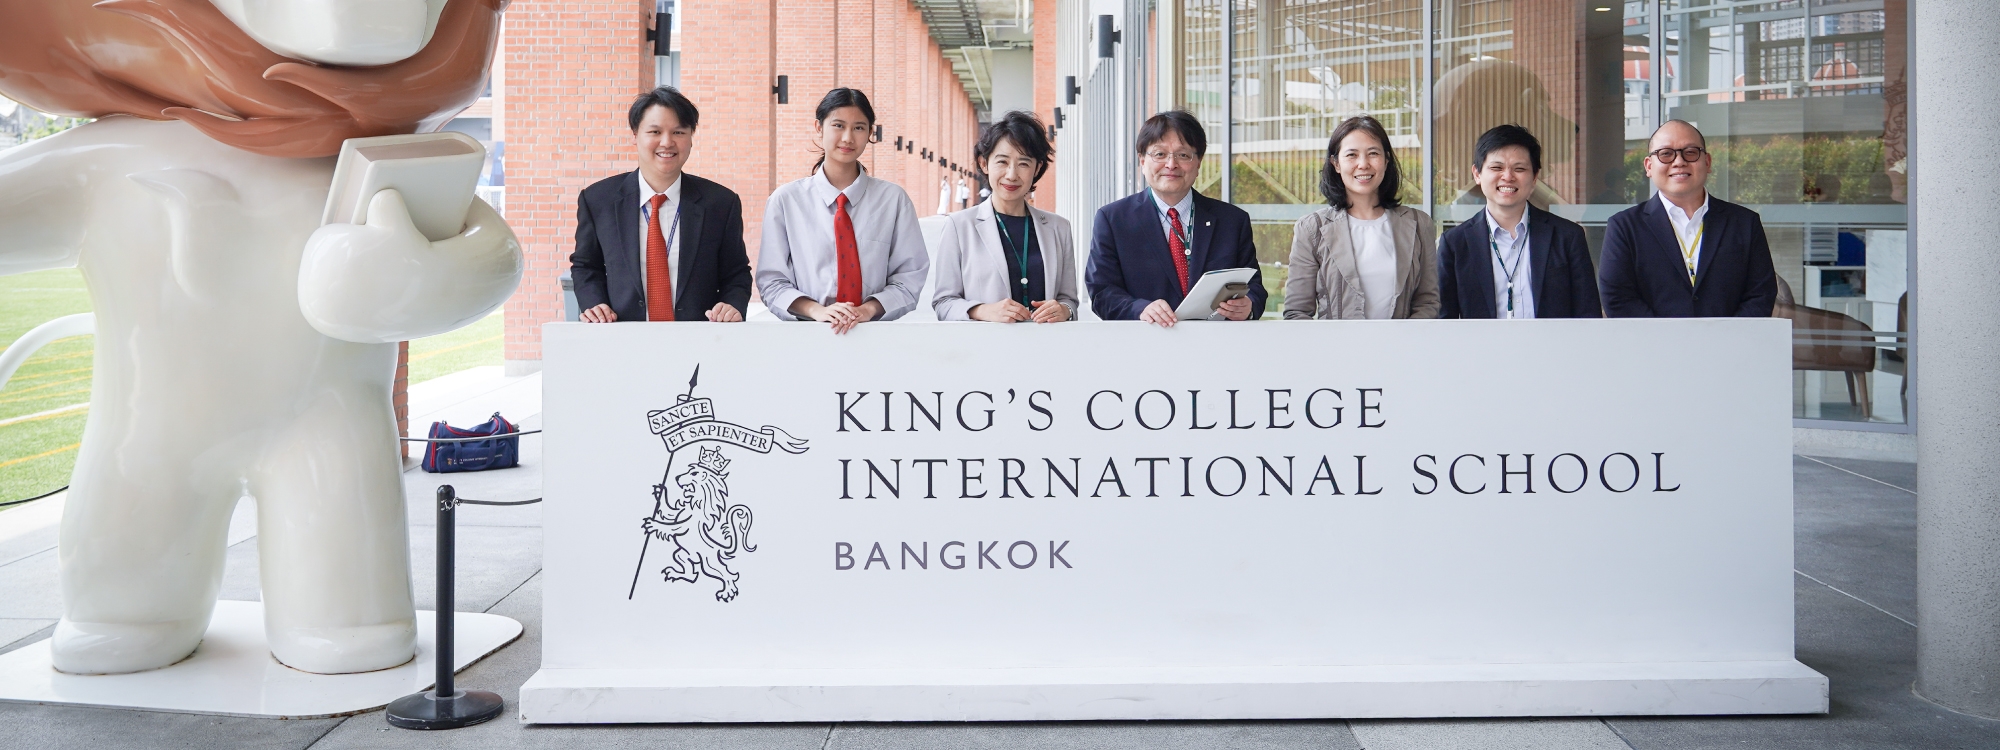 King’s Bangkok welcomed the Vice President for International Affairs, Professor of the Faculty of Social Sciences and Director of International Affairs from Waseda University to a school visit